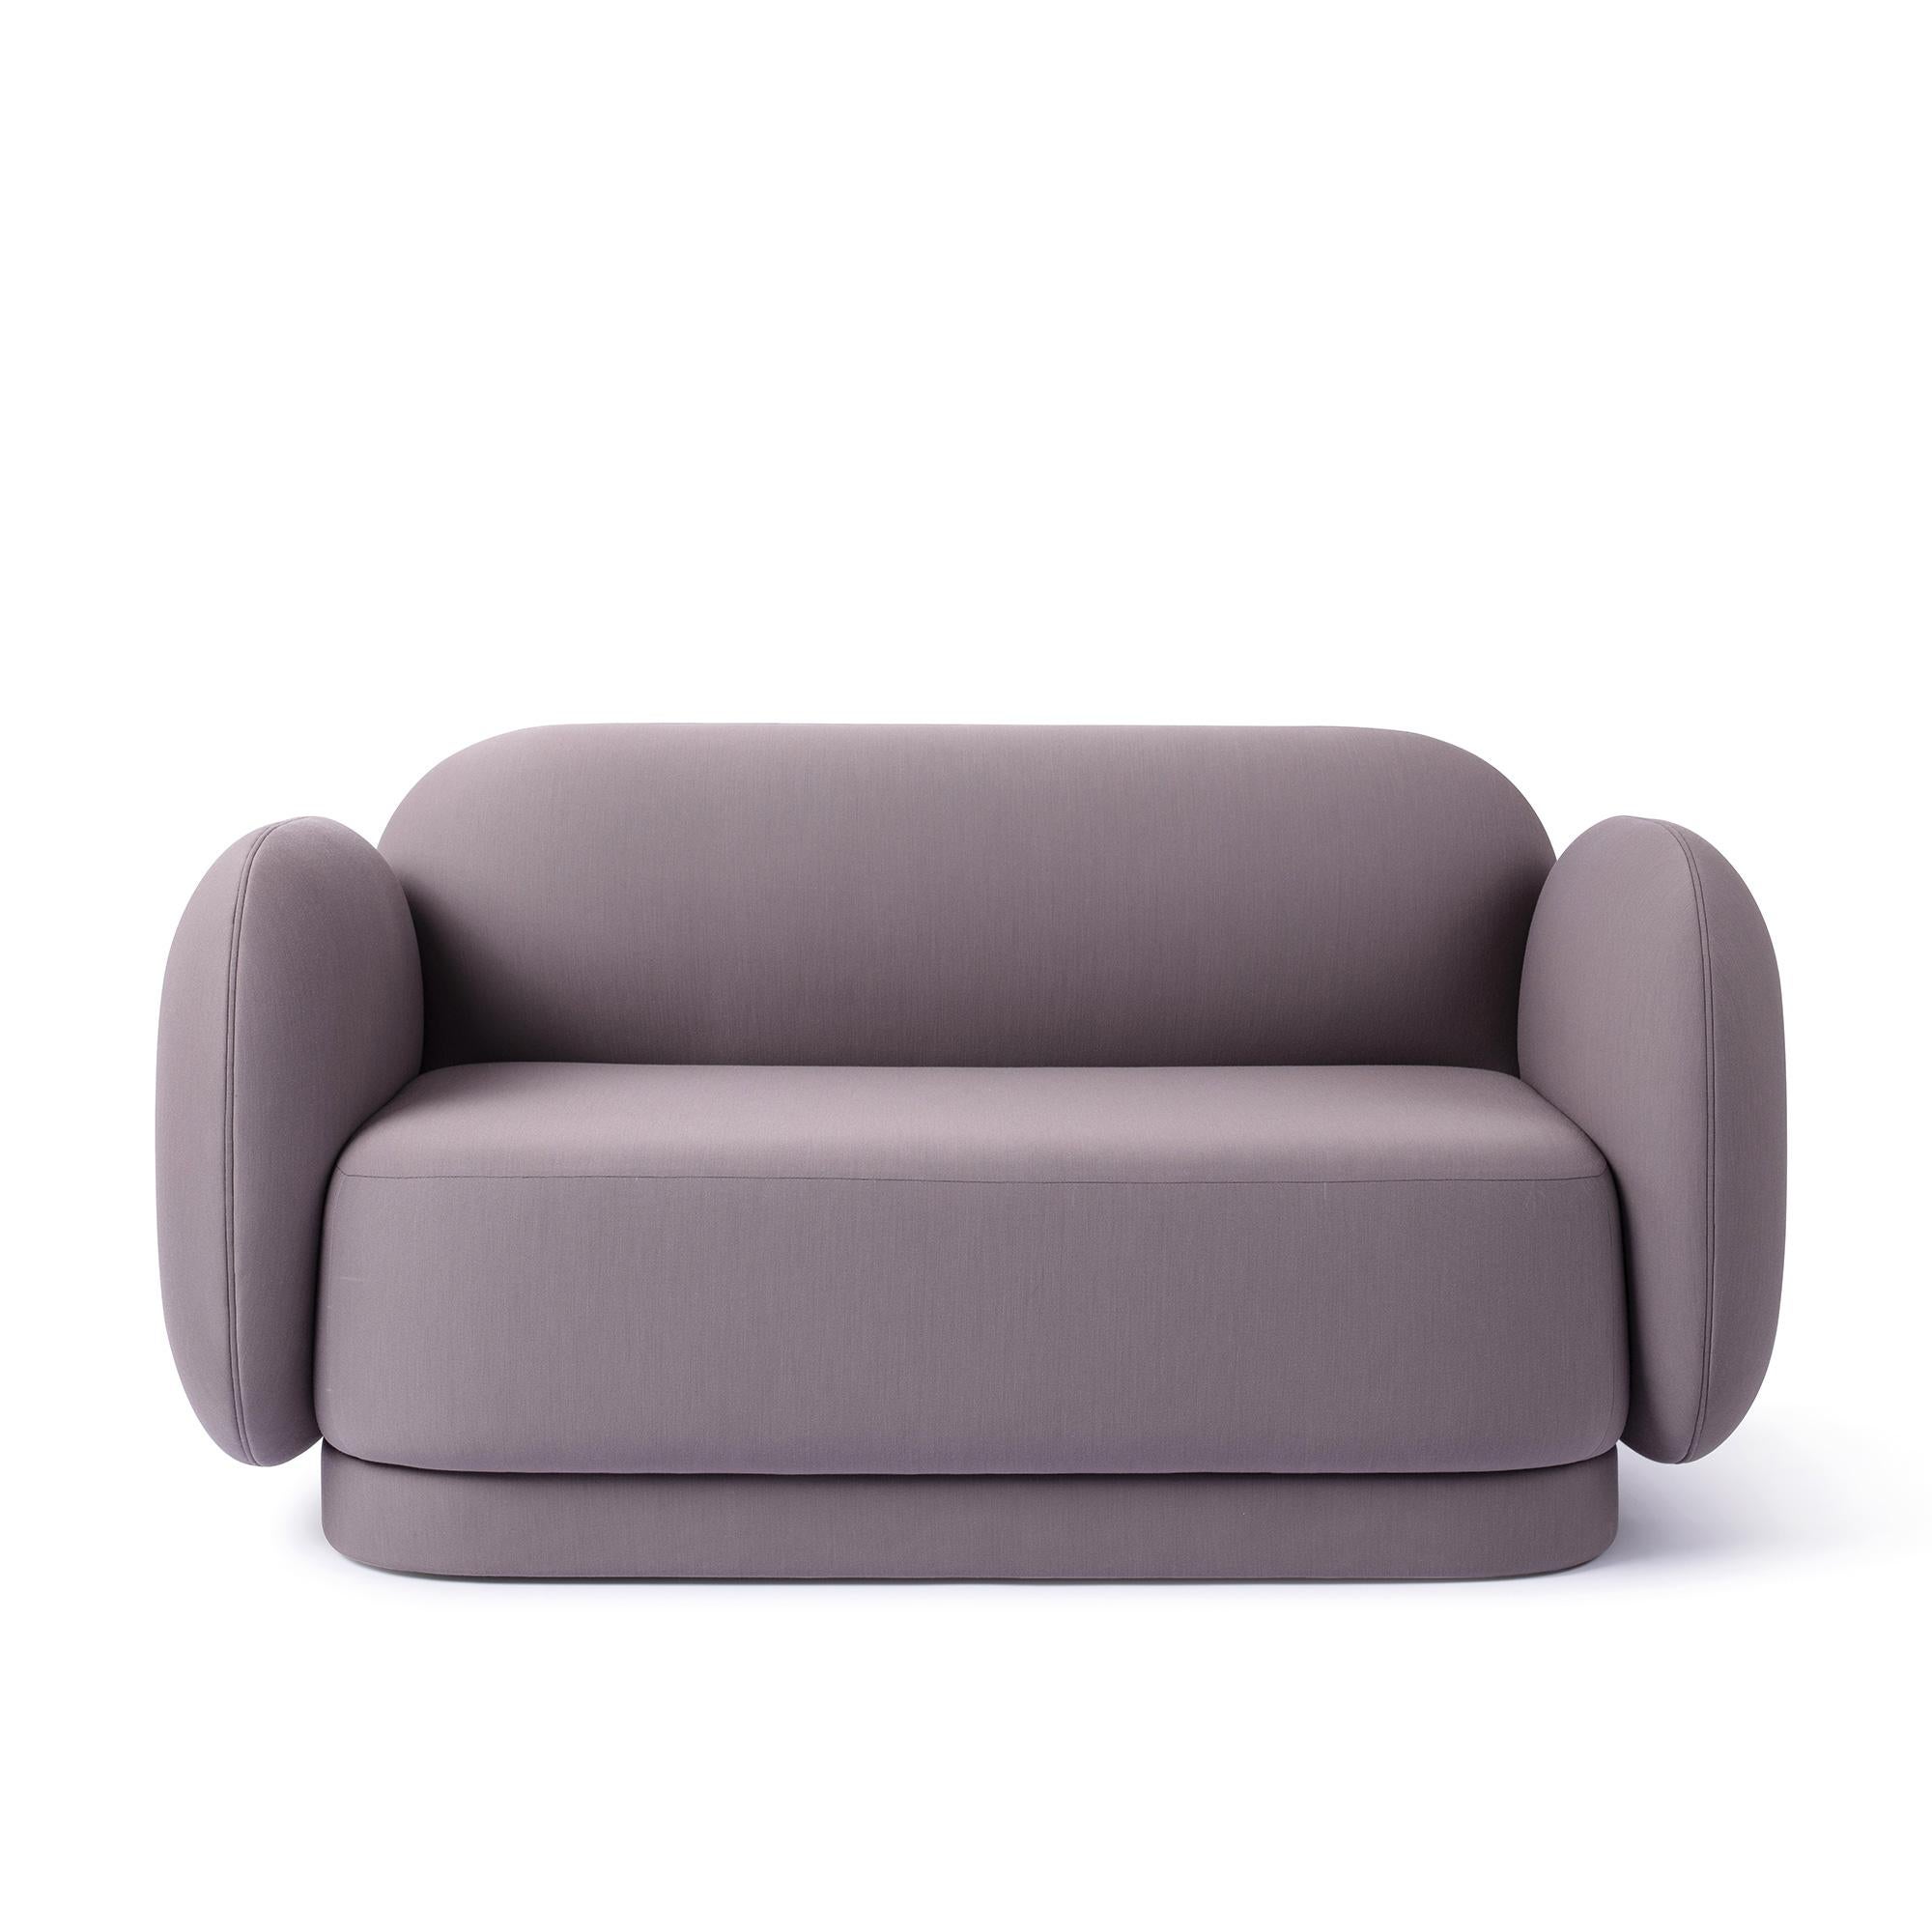 Two seater major Tom sofa designed by Thomas Dariel
Dimensions: D 89 x W 174 x H 87 cm
Materials: structure in solid timber and plywood. Memory foam Base and seating fully upholstered in fabric.
Available in finishes: kvadrat premium collection,